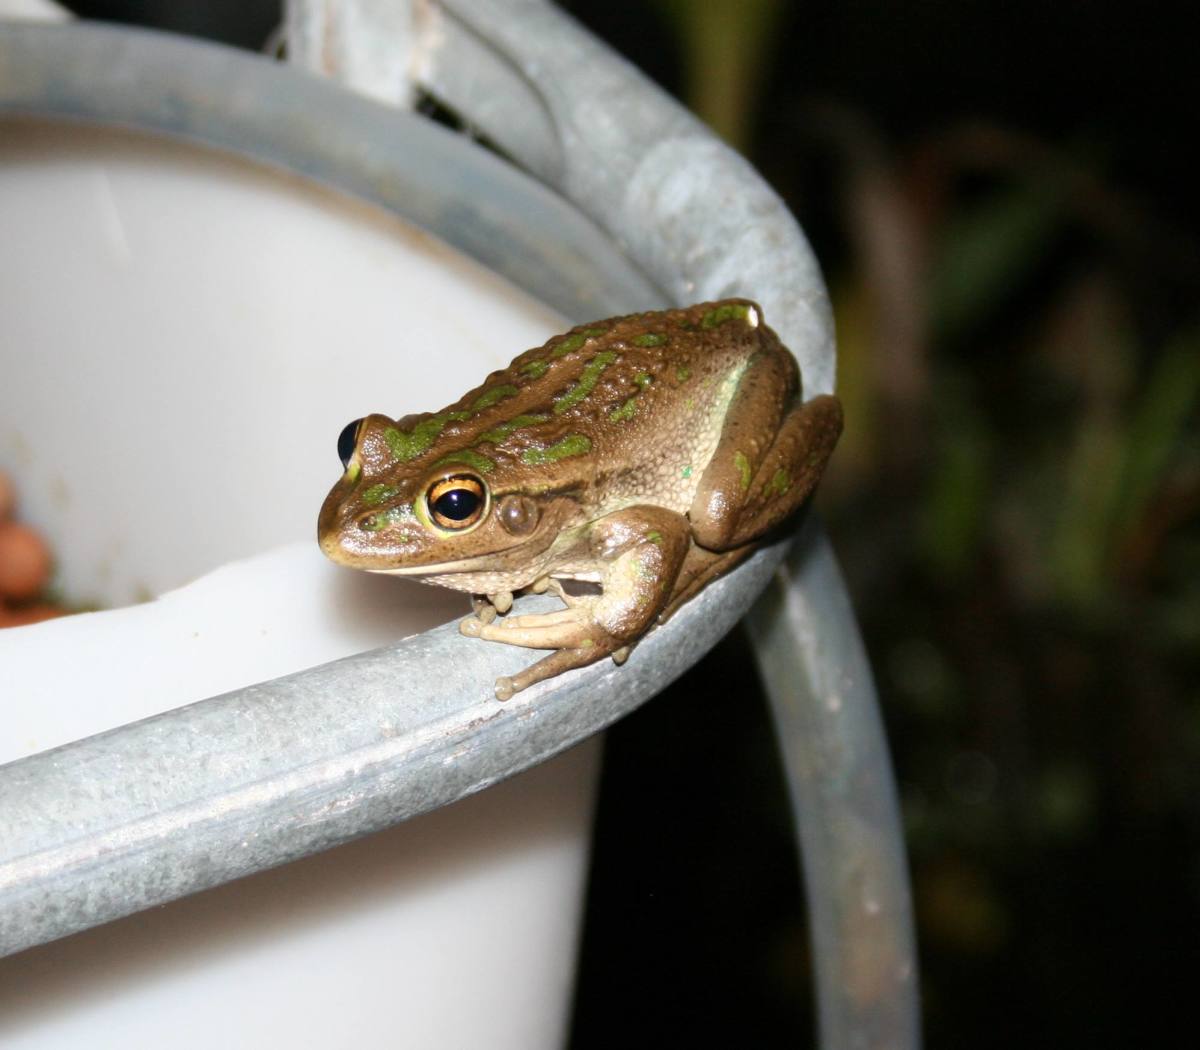 Aquaponics makes for a frog friendly garden, so expect visitors... What could be more eco friendly?